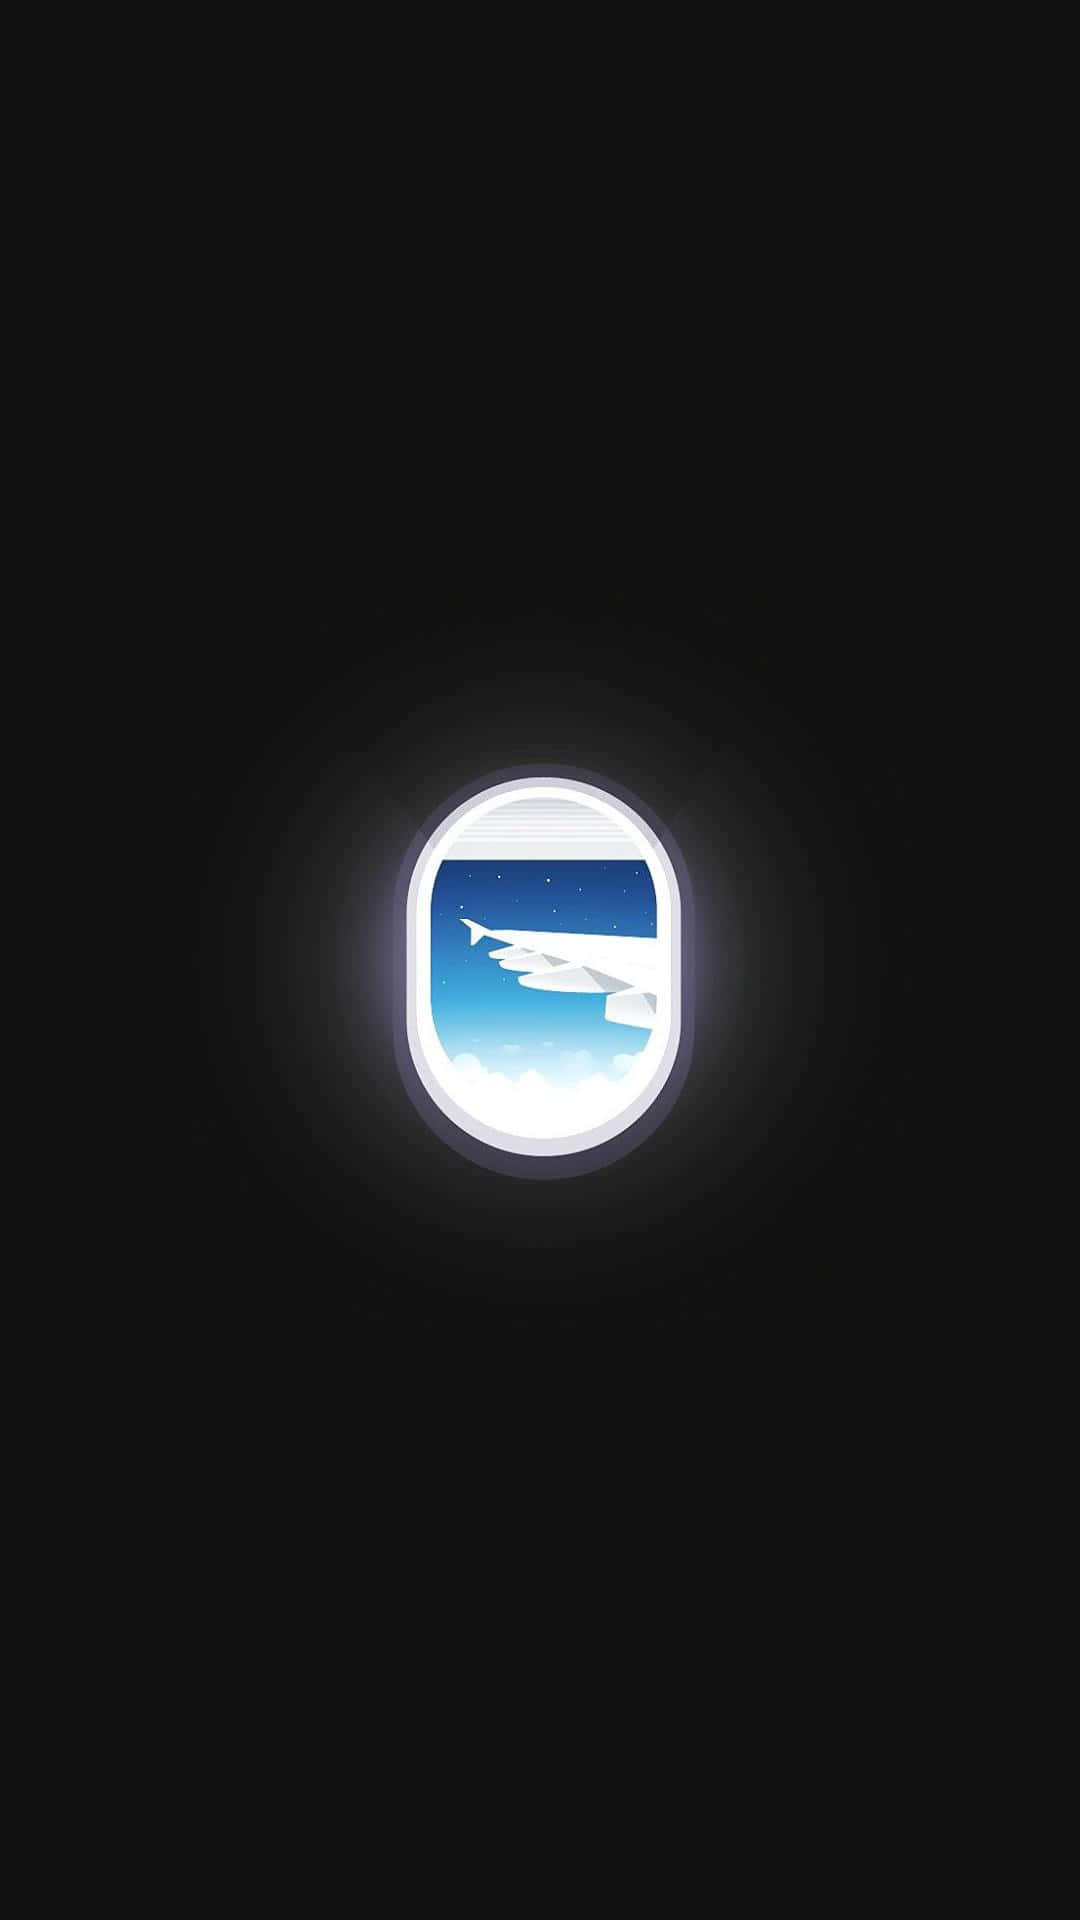 Amoled Background Airplane Window Clouds